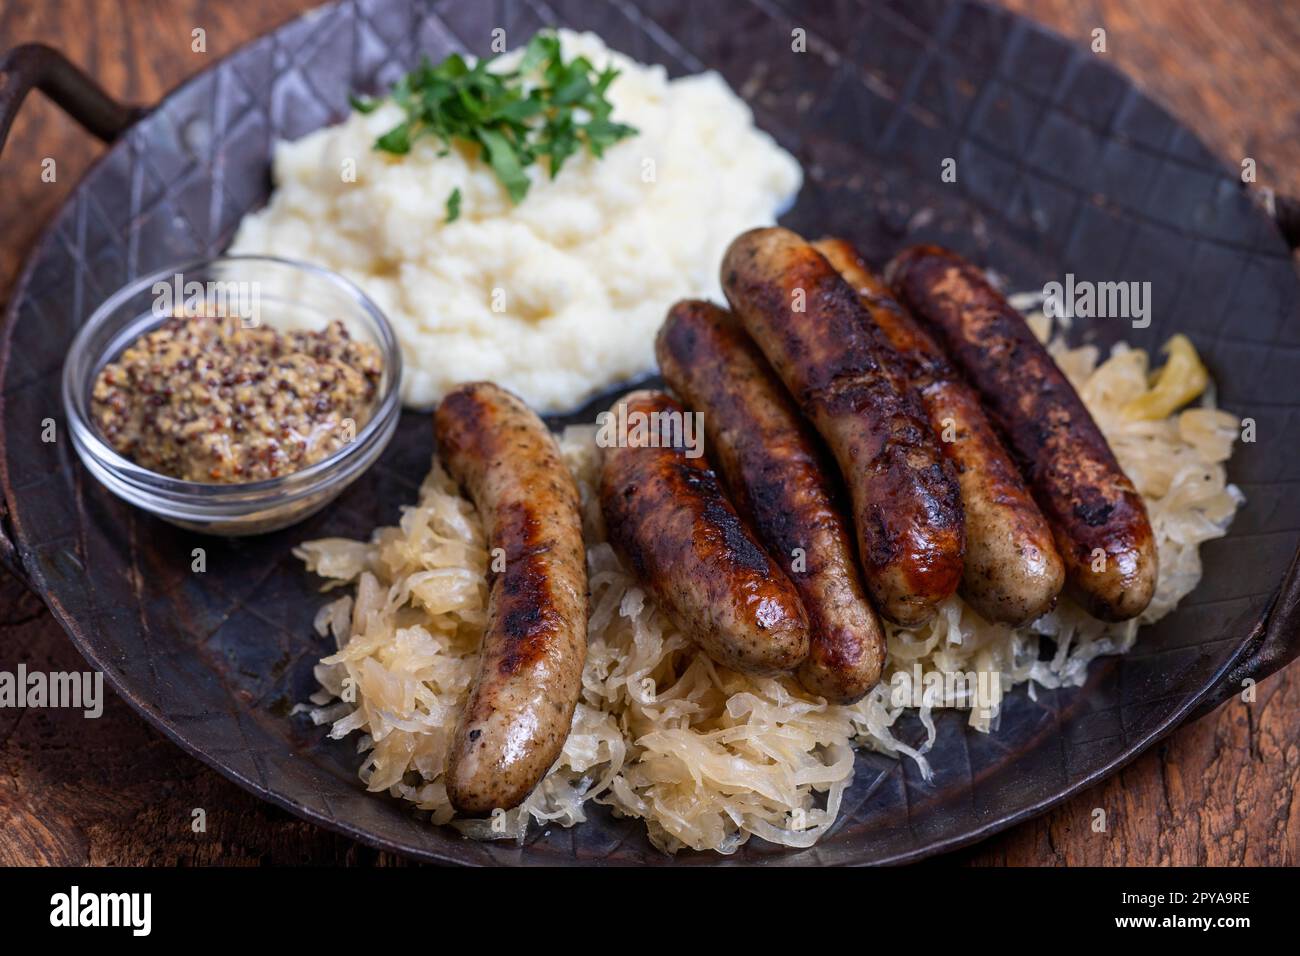 grilled franconian sausages Stock Photo